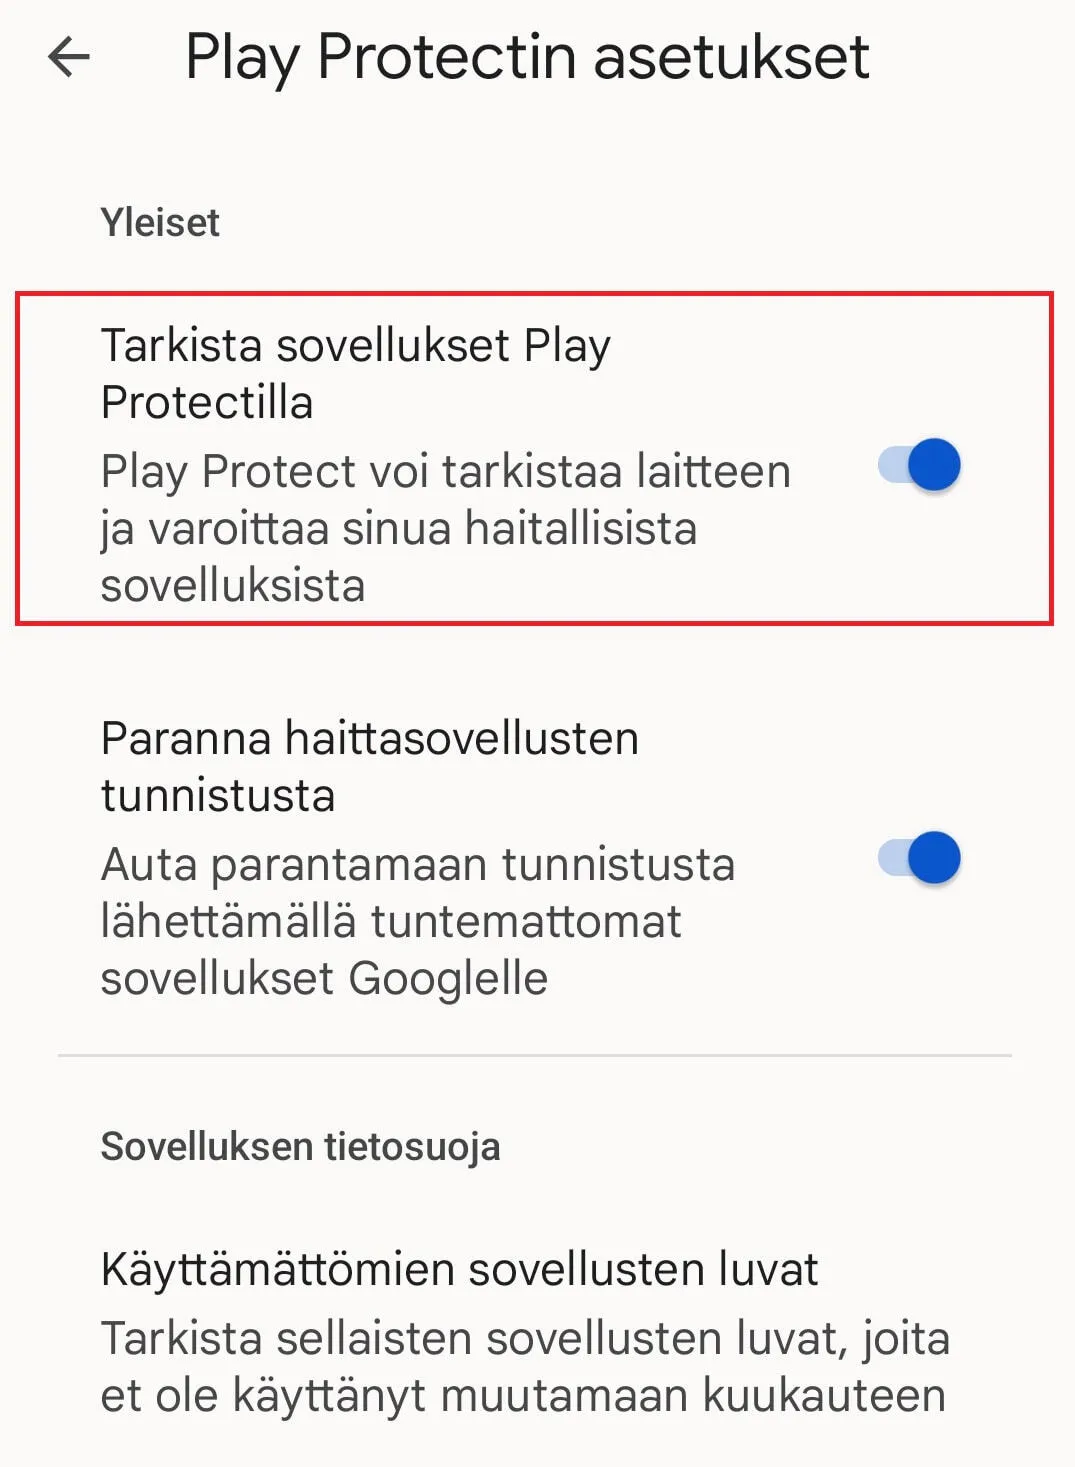 Enable Scan apps with Play Protect